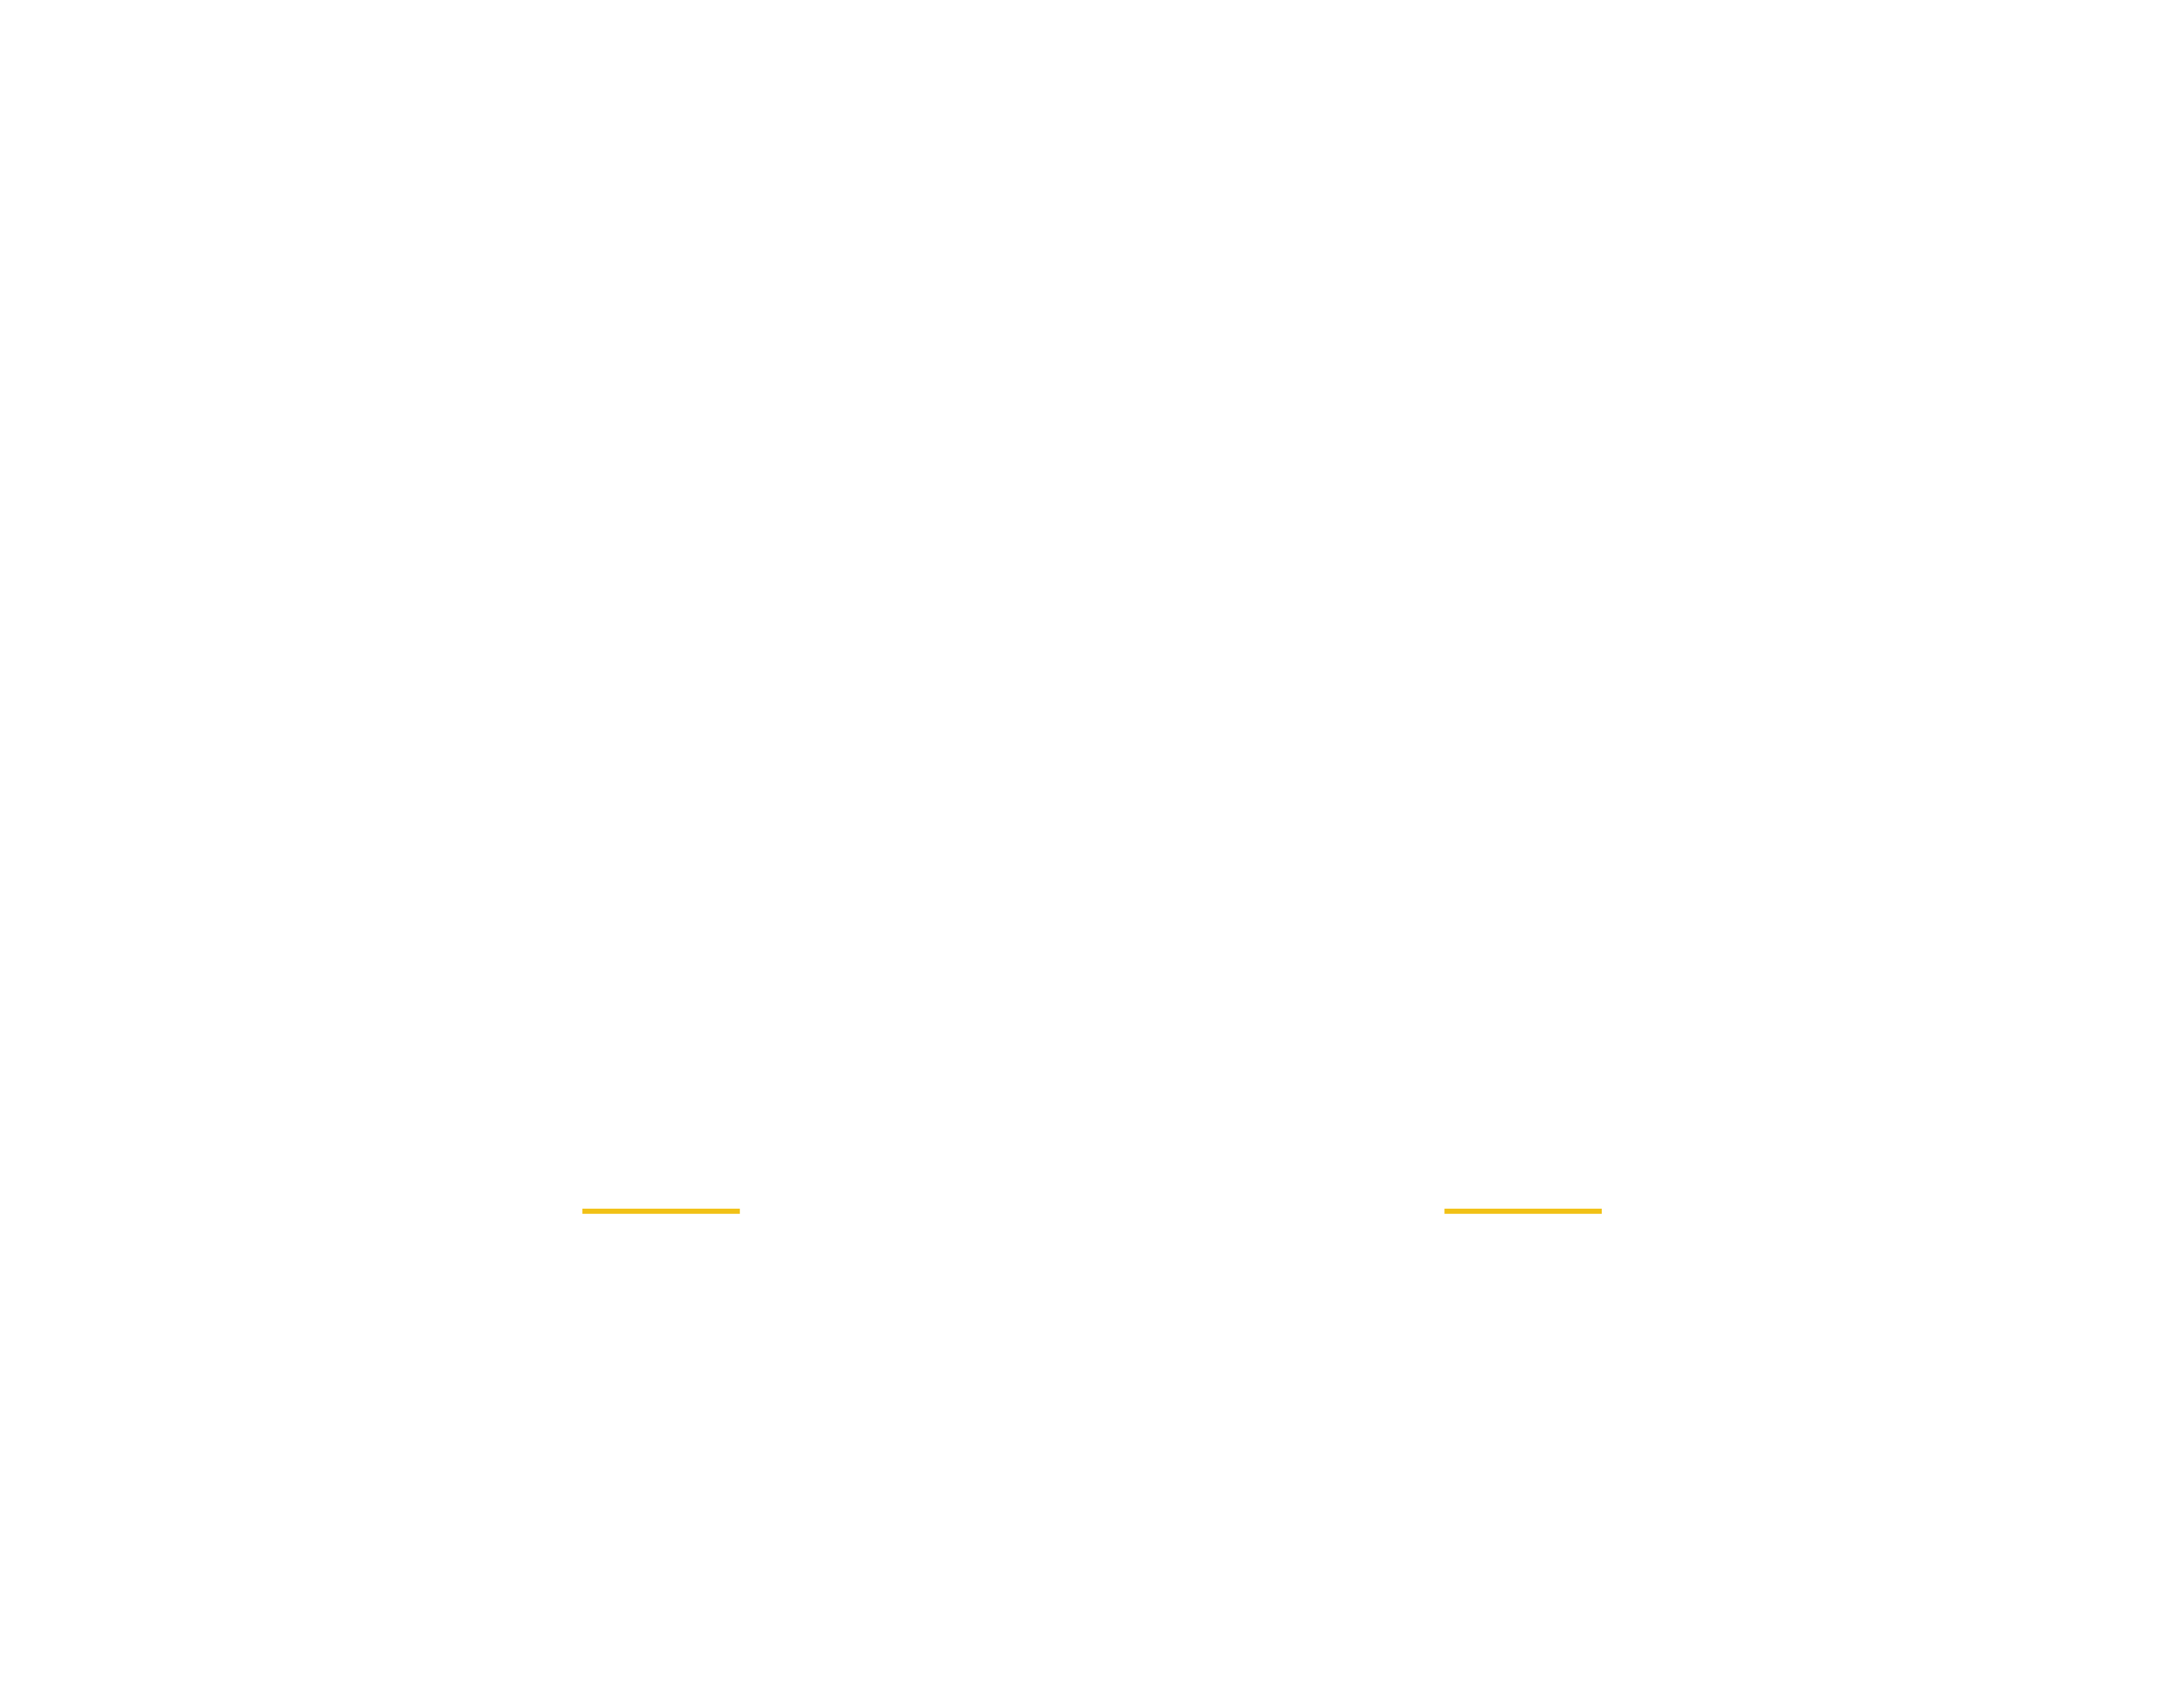 Responders On A Mission